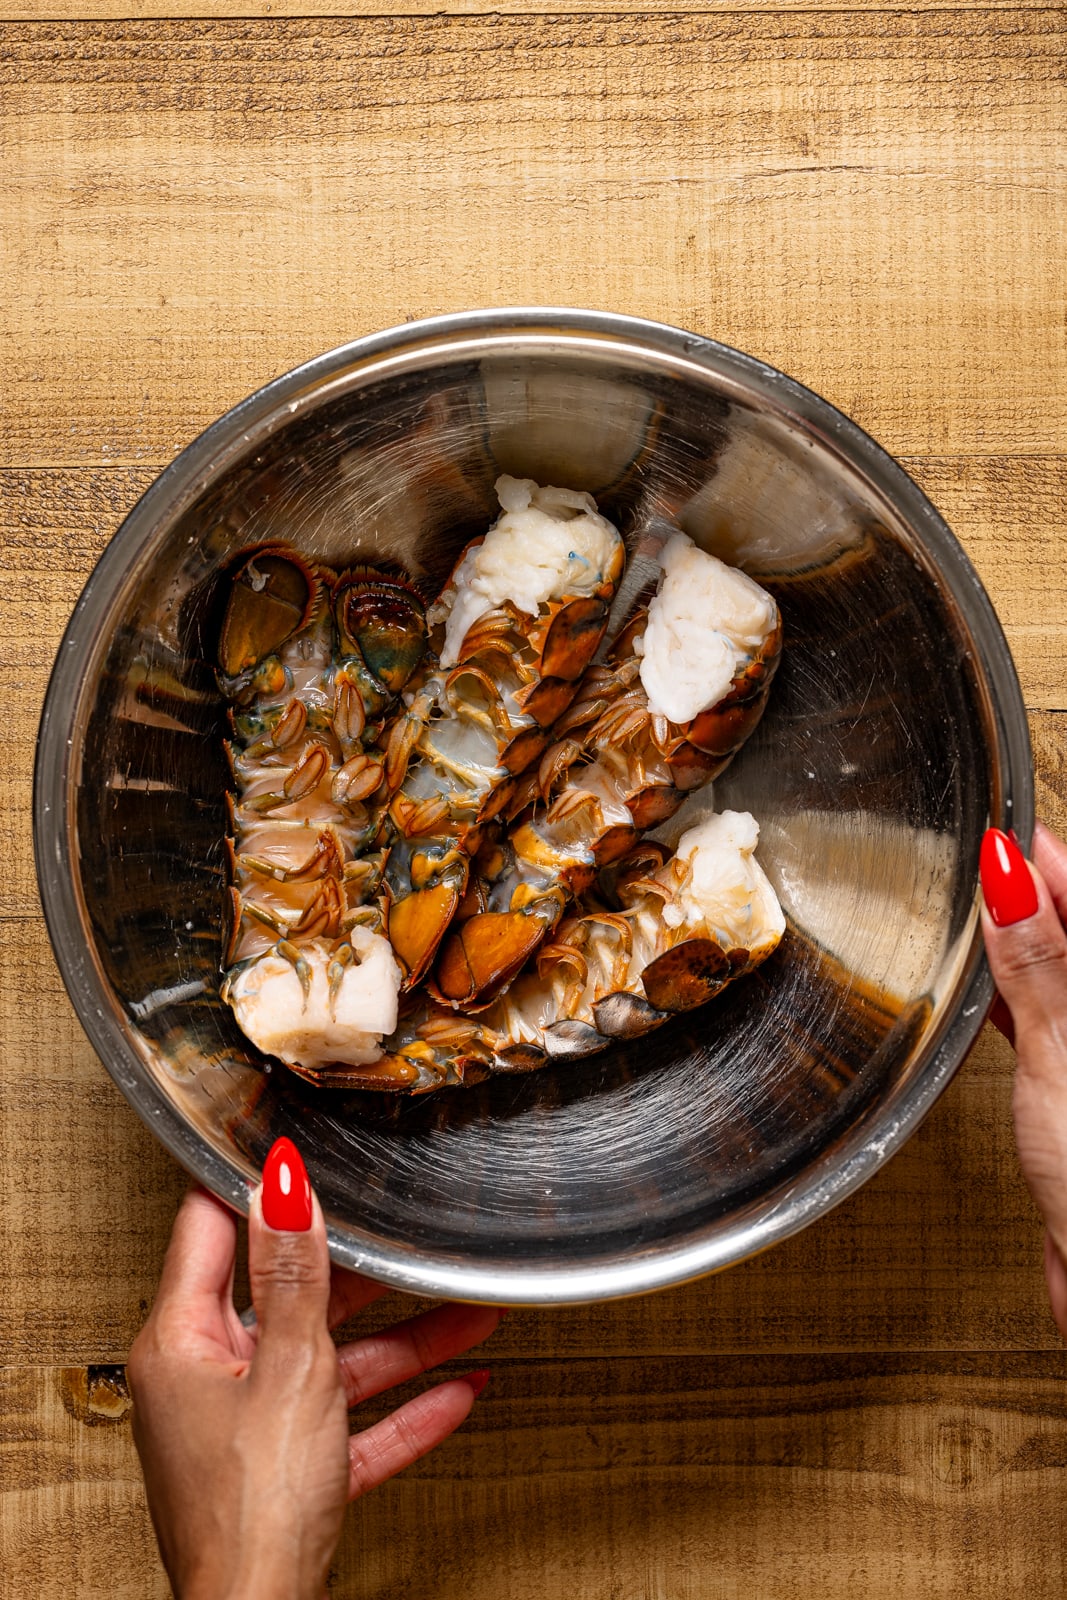 Lobster tails in a silver bowl.